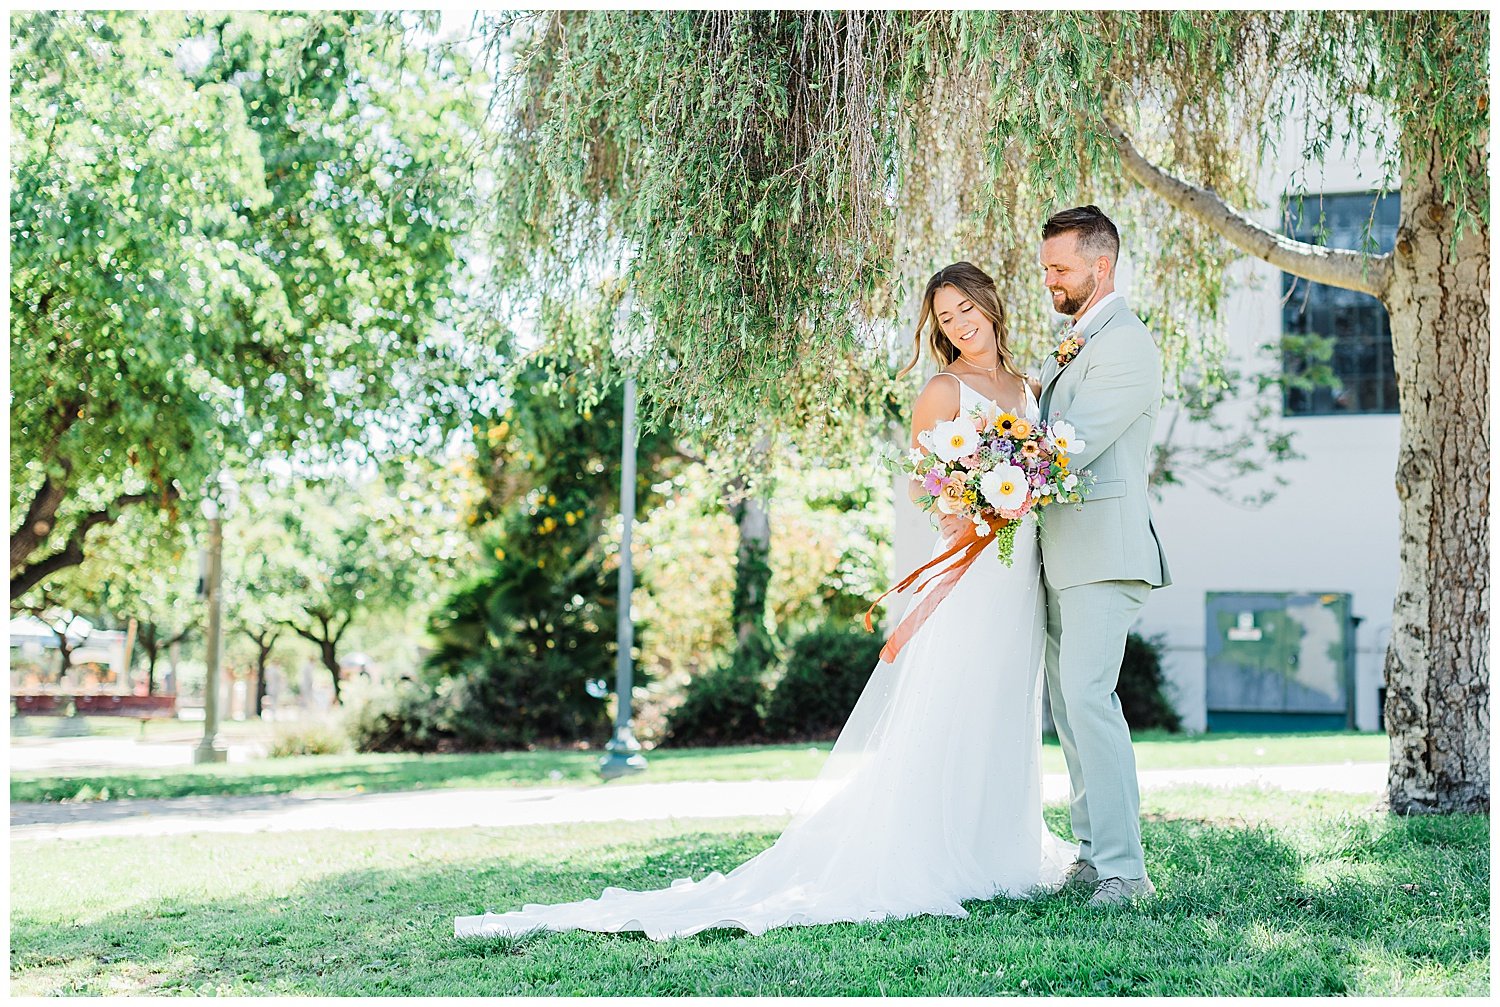 Bride and groom portrait under a willow tree